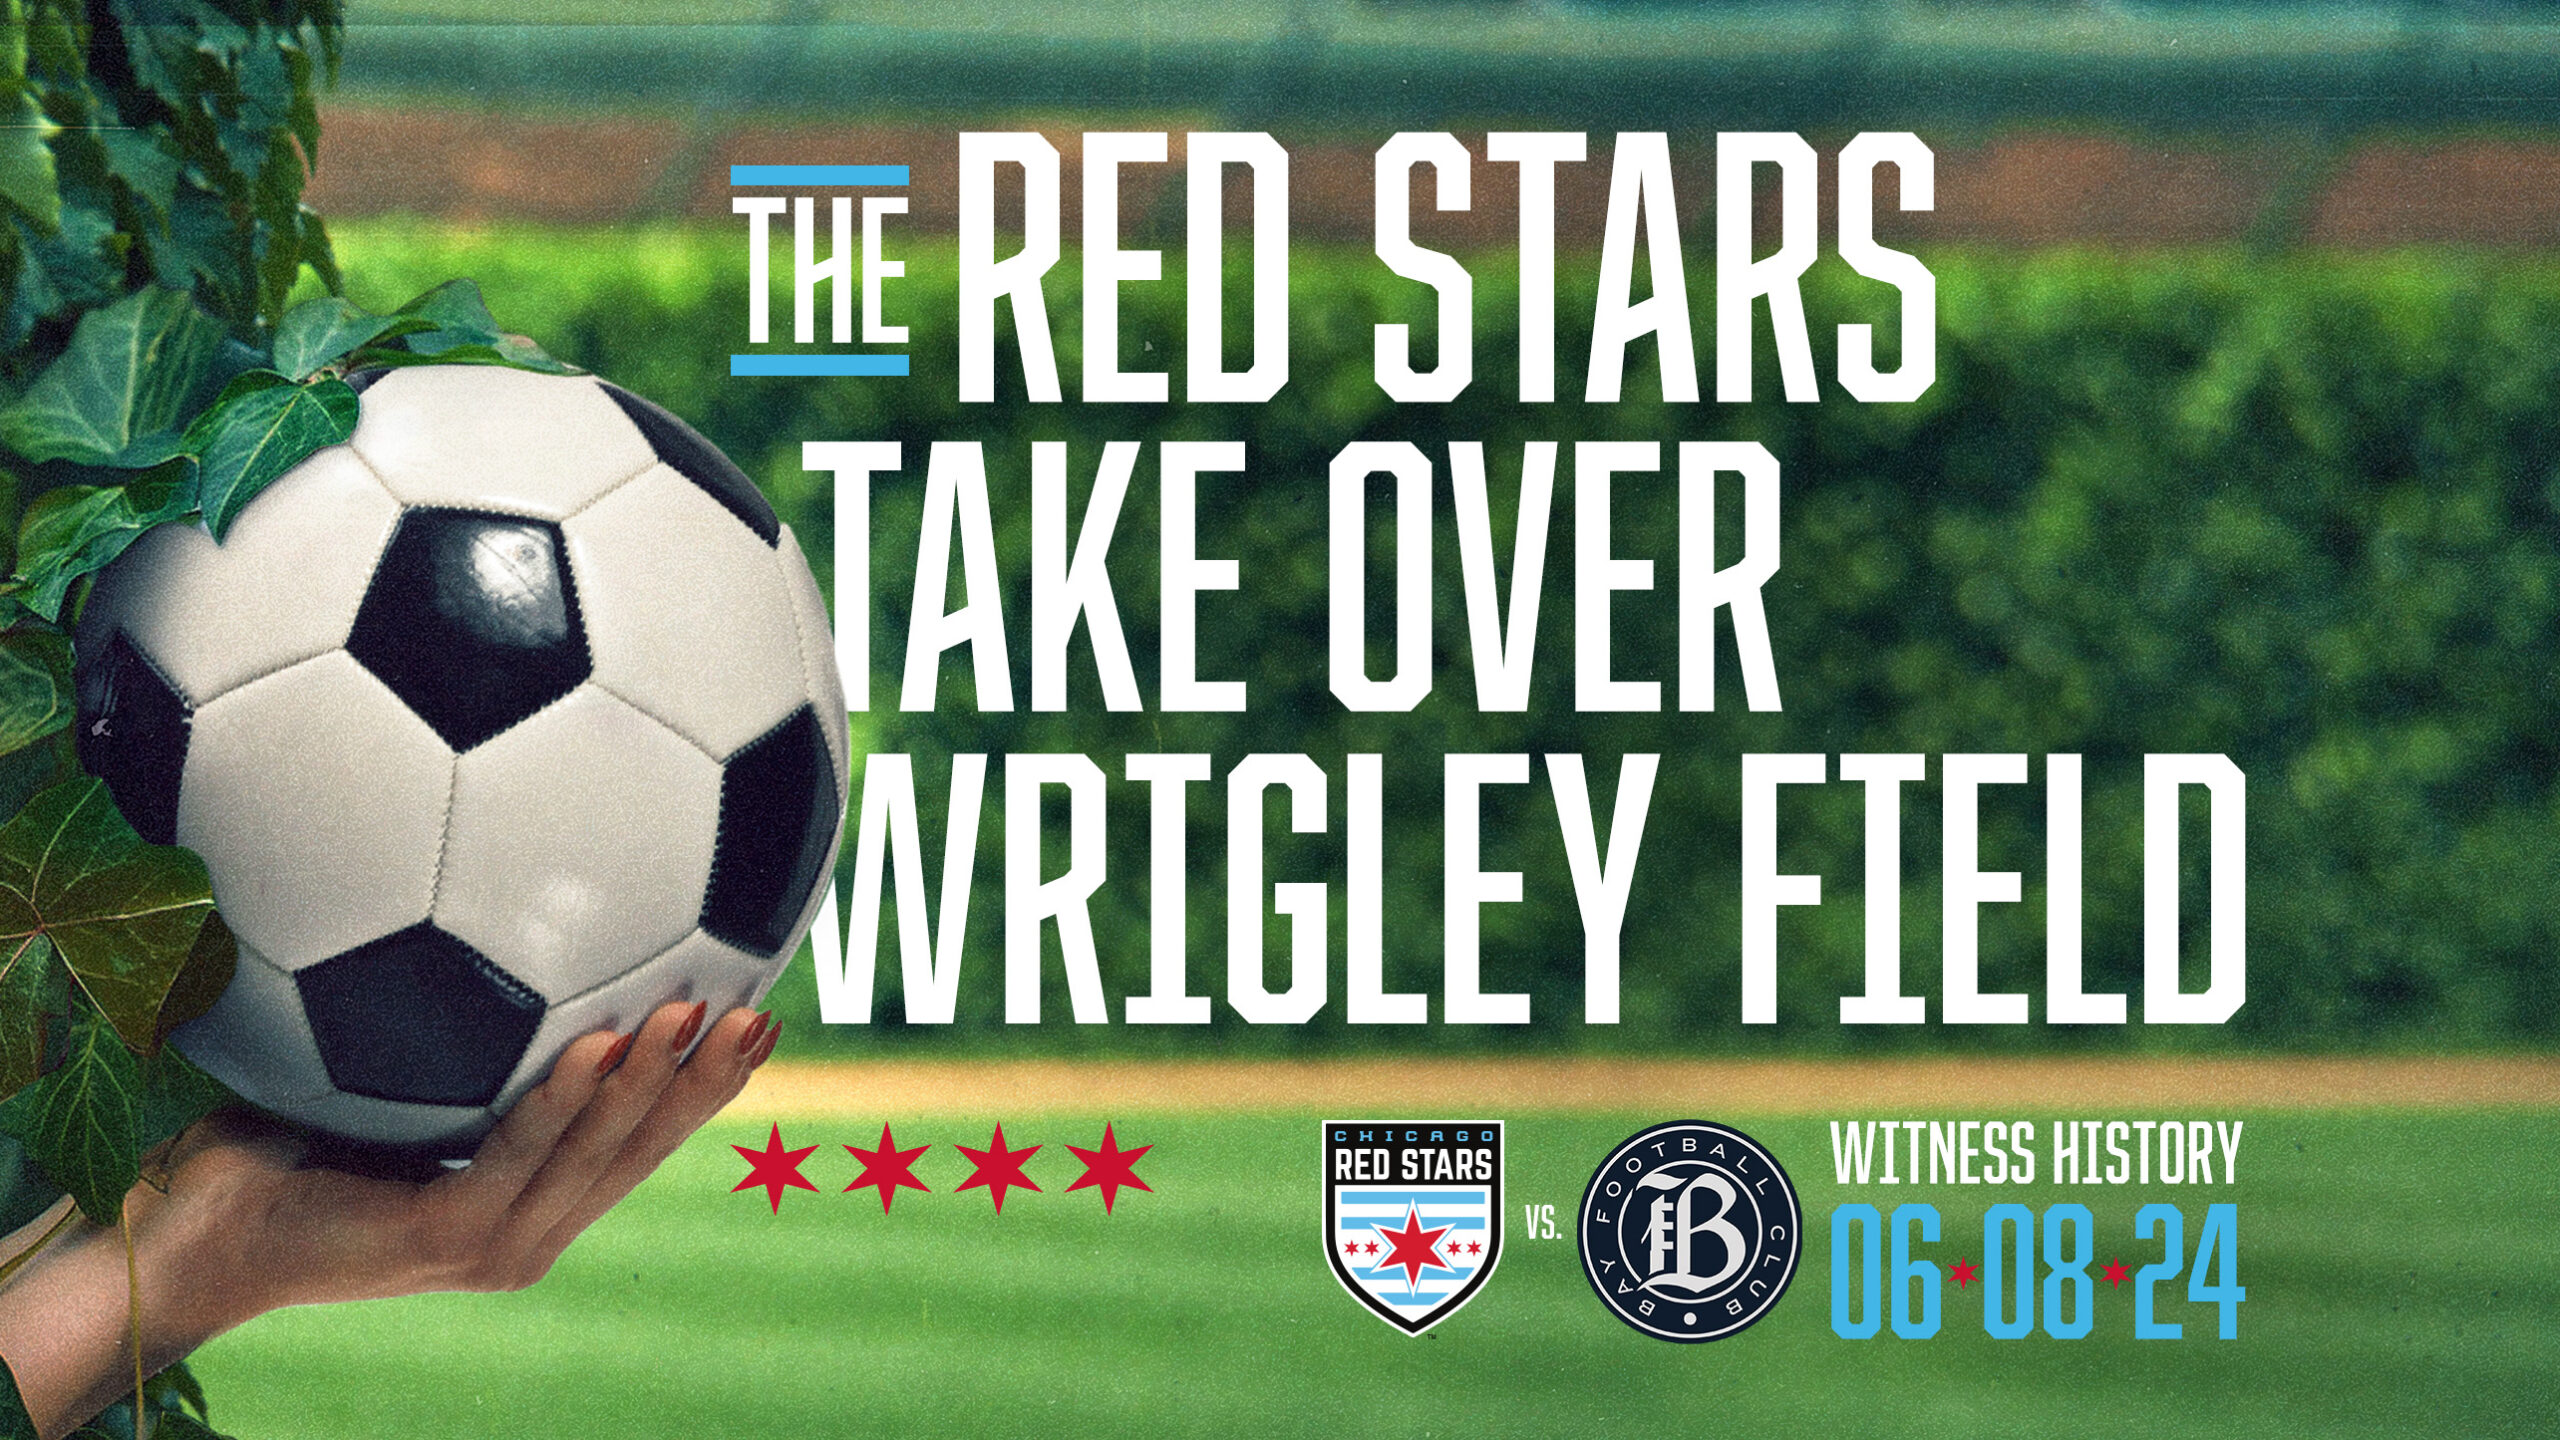 Chicago Red Stars Make History with First-Ever Wrigley Field NWSL Match